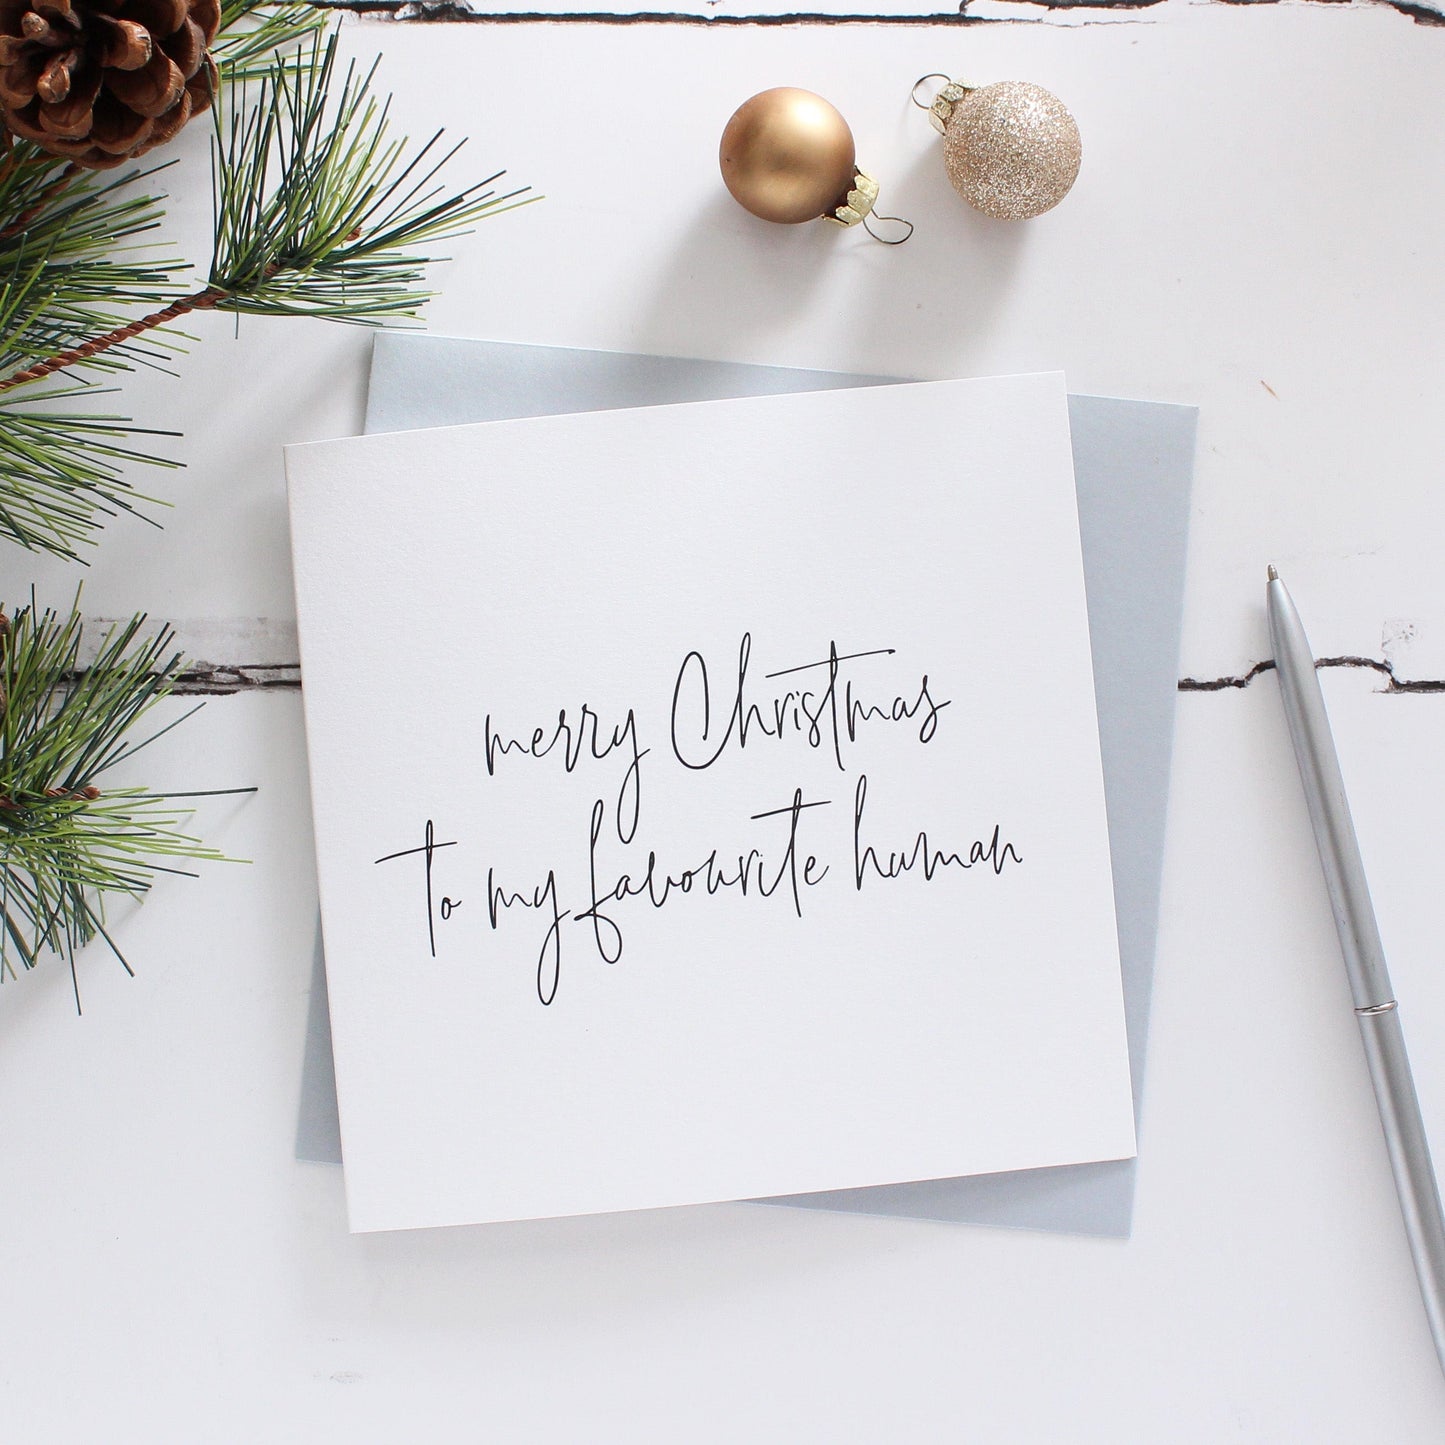 Favourite human Christmas card from Purple Tree Designs